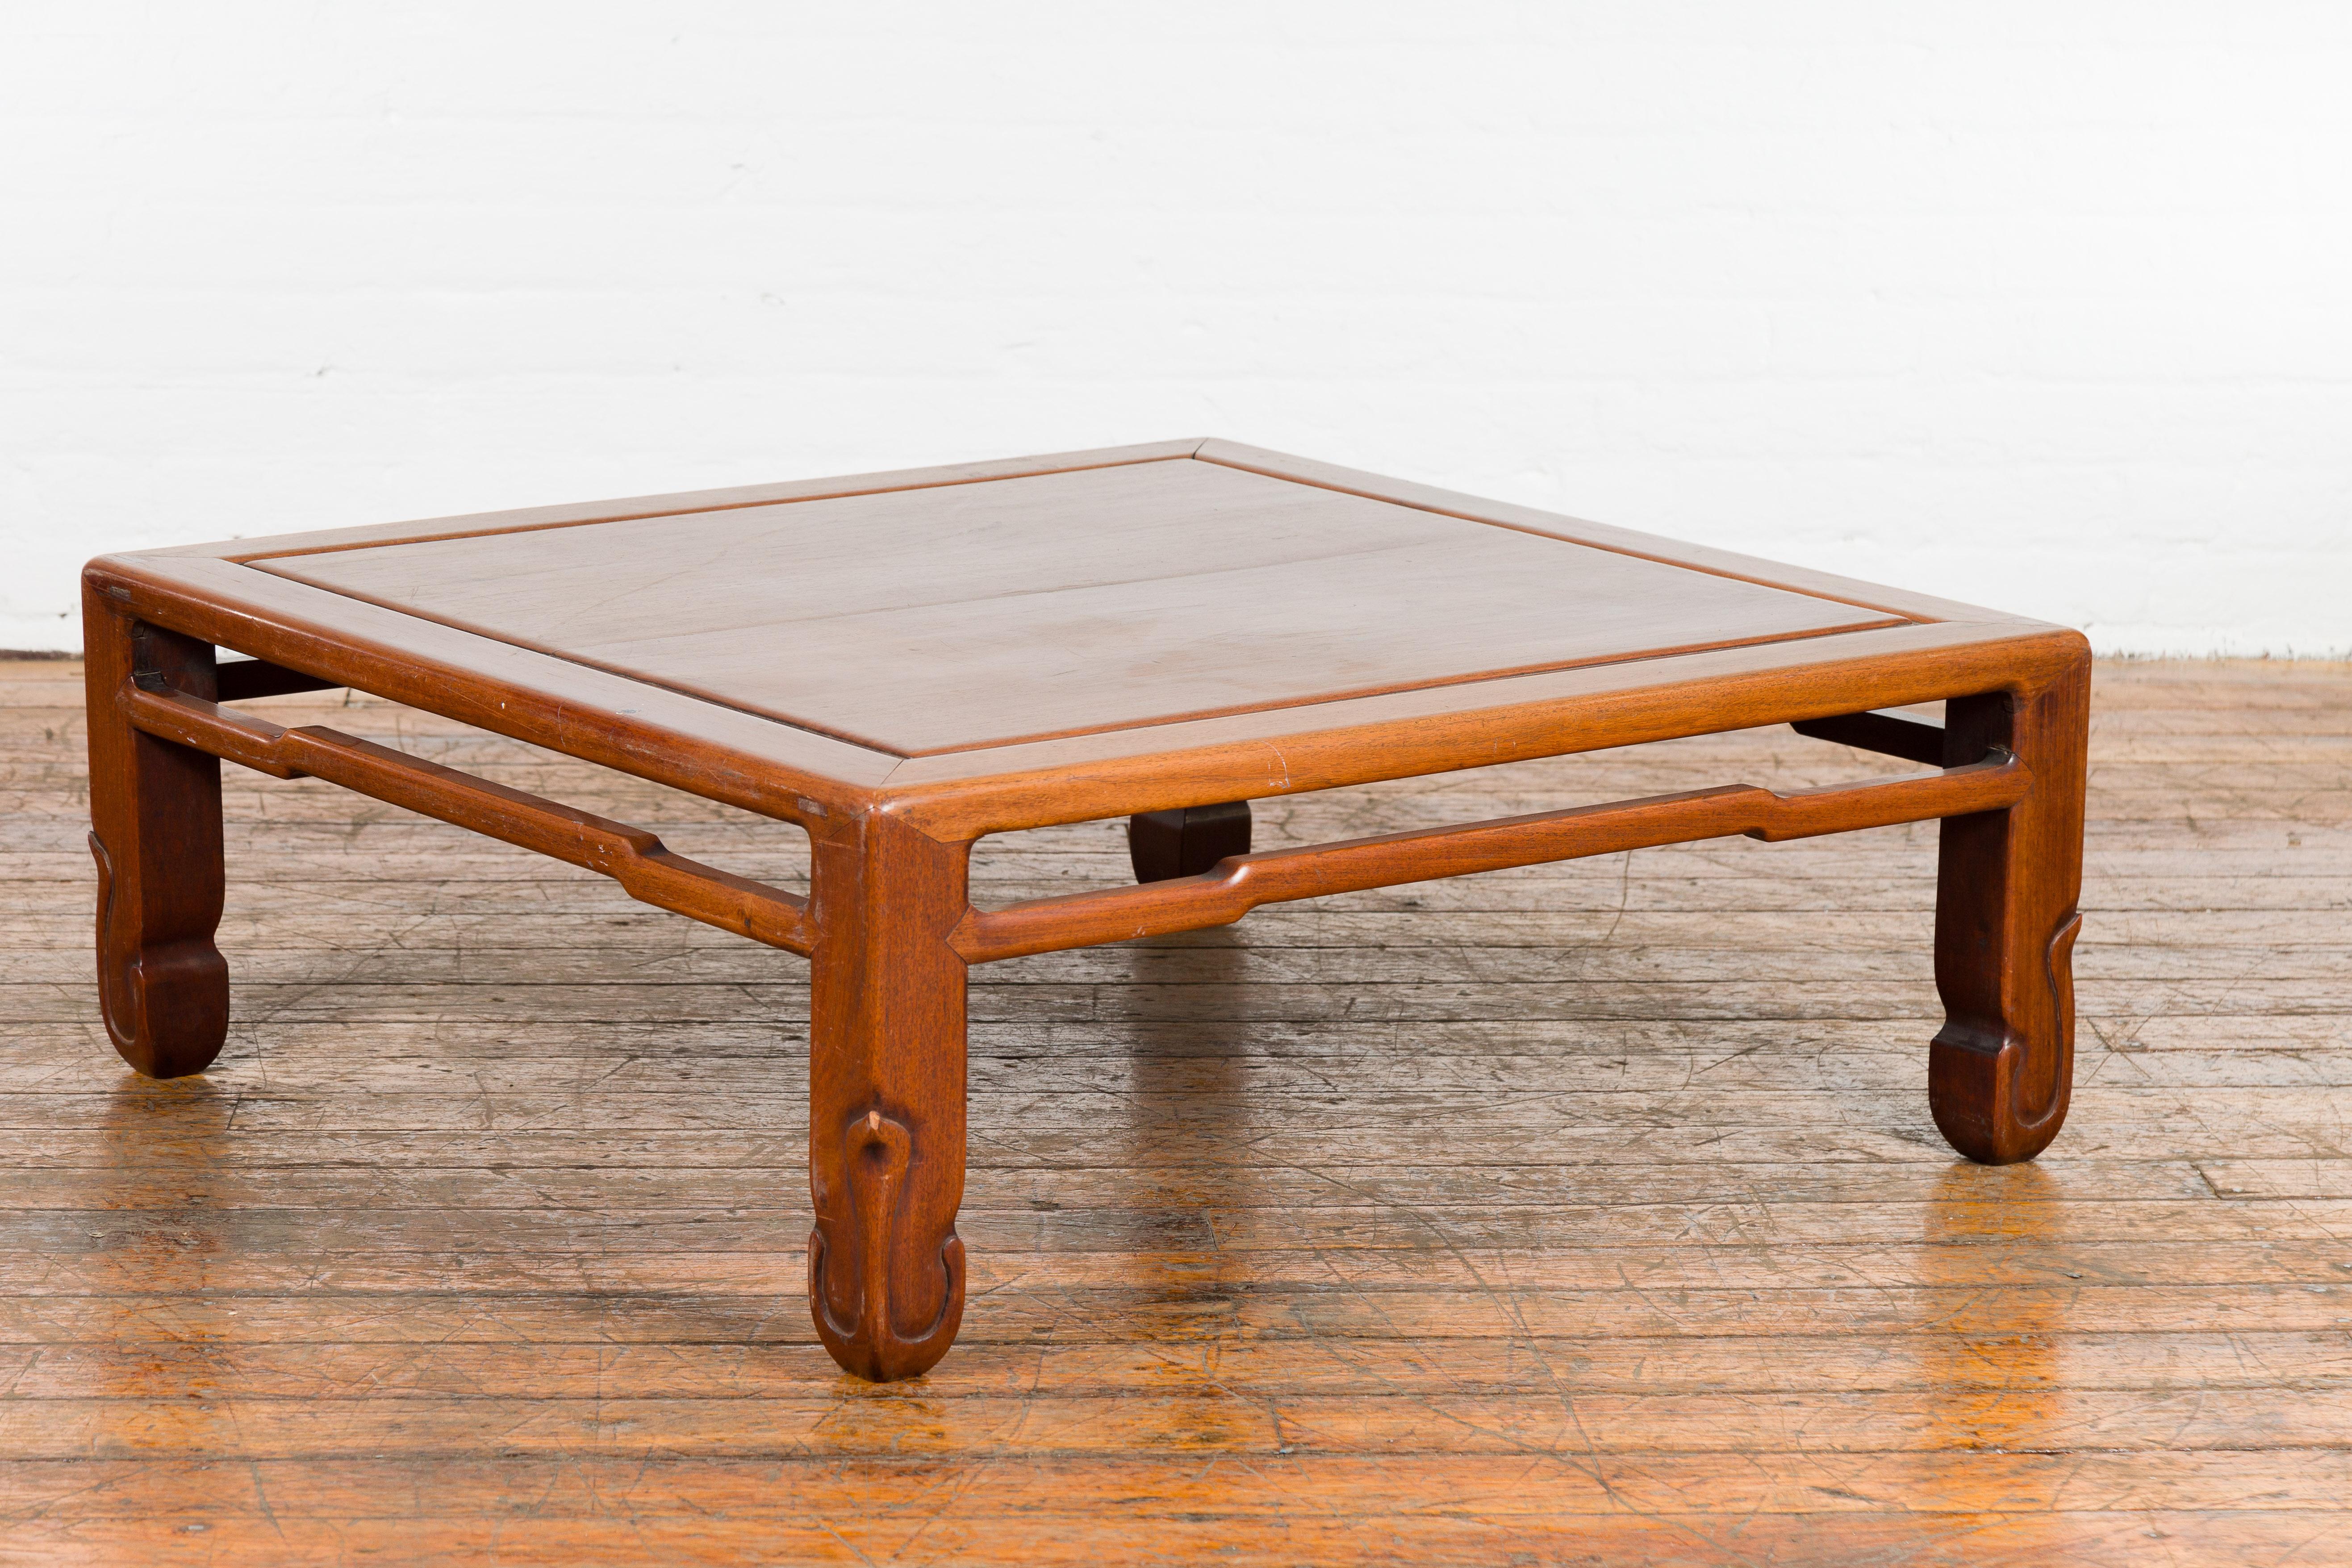 Qing 19th Century Low Kang Coffee Table with Humpback Stretcher and Horsehoof Feet For Sale